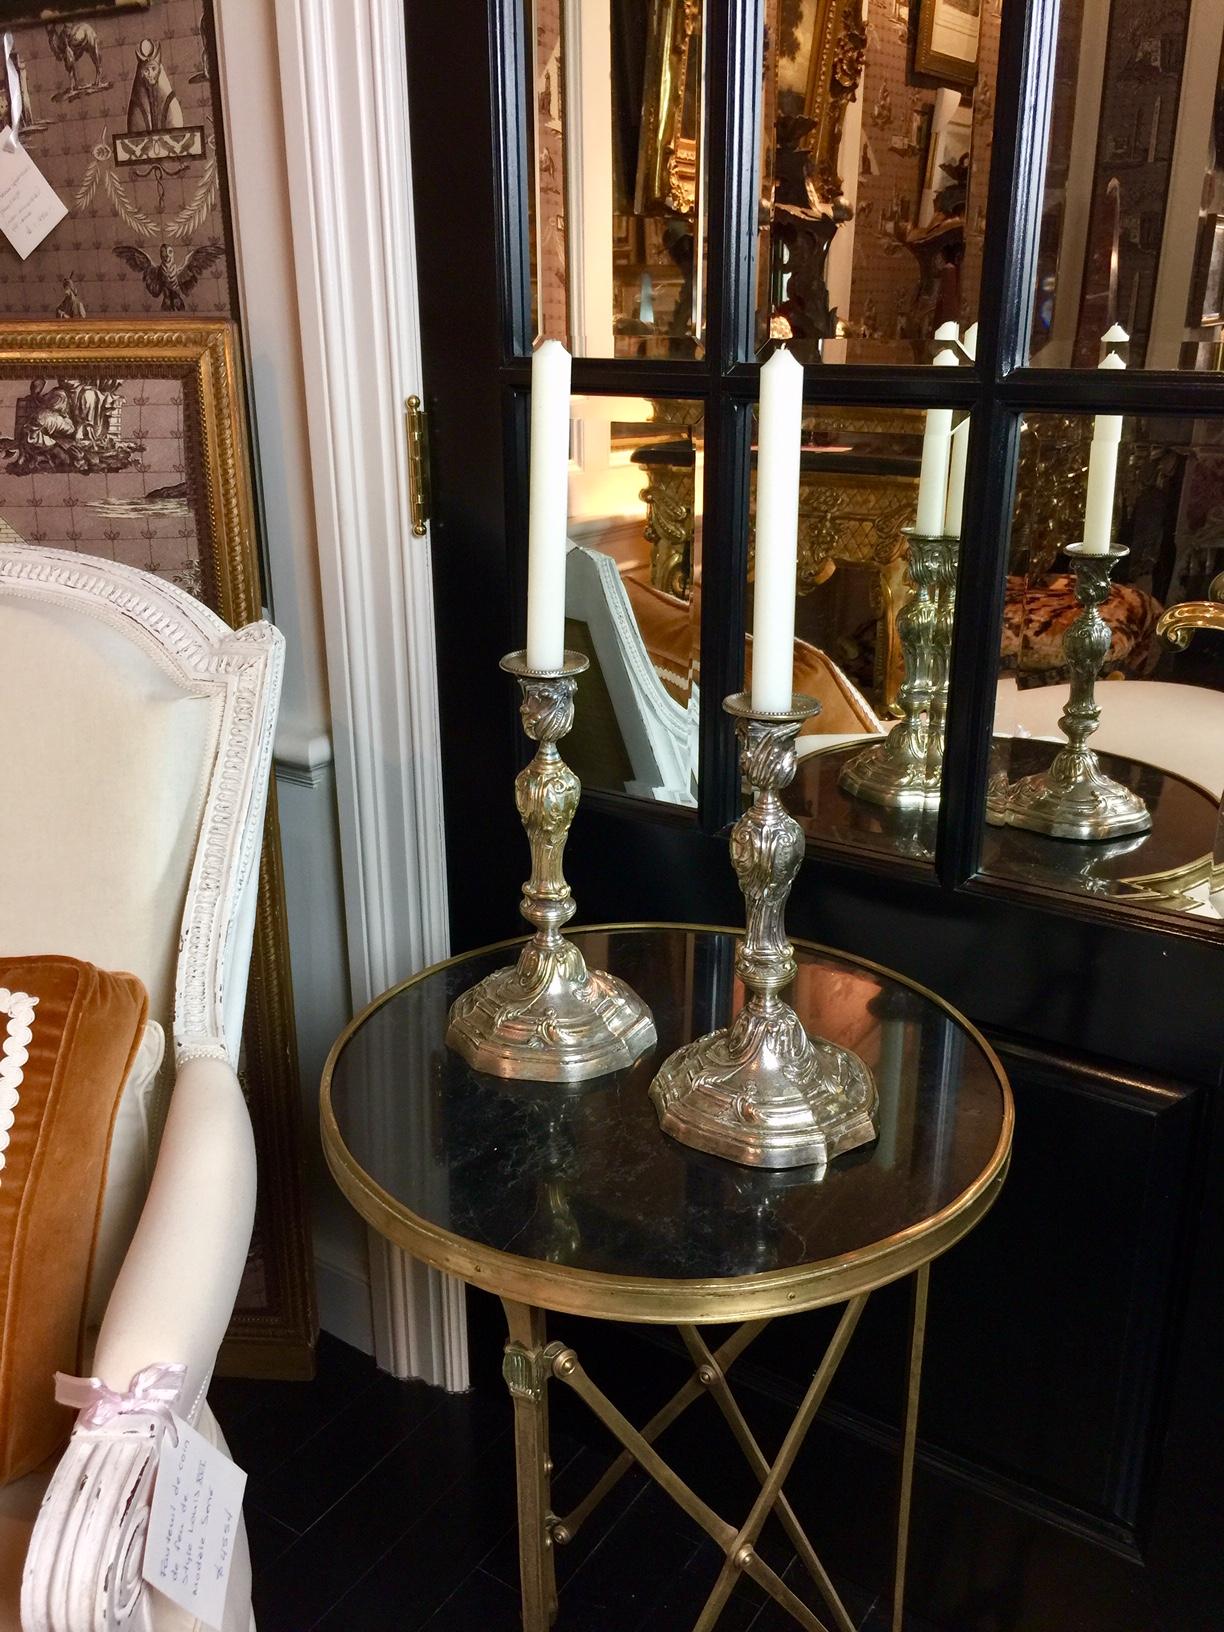 French, pair of silvered bronze Louis XV style candlesticks.
Typical of the Rocaille style, also known as Baroque or Rococo style which reached its zenith in the 18th century, during the reign of Louis XV, and particularly favored by the King's